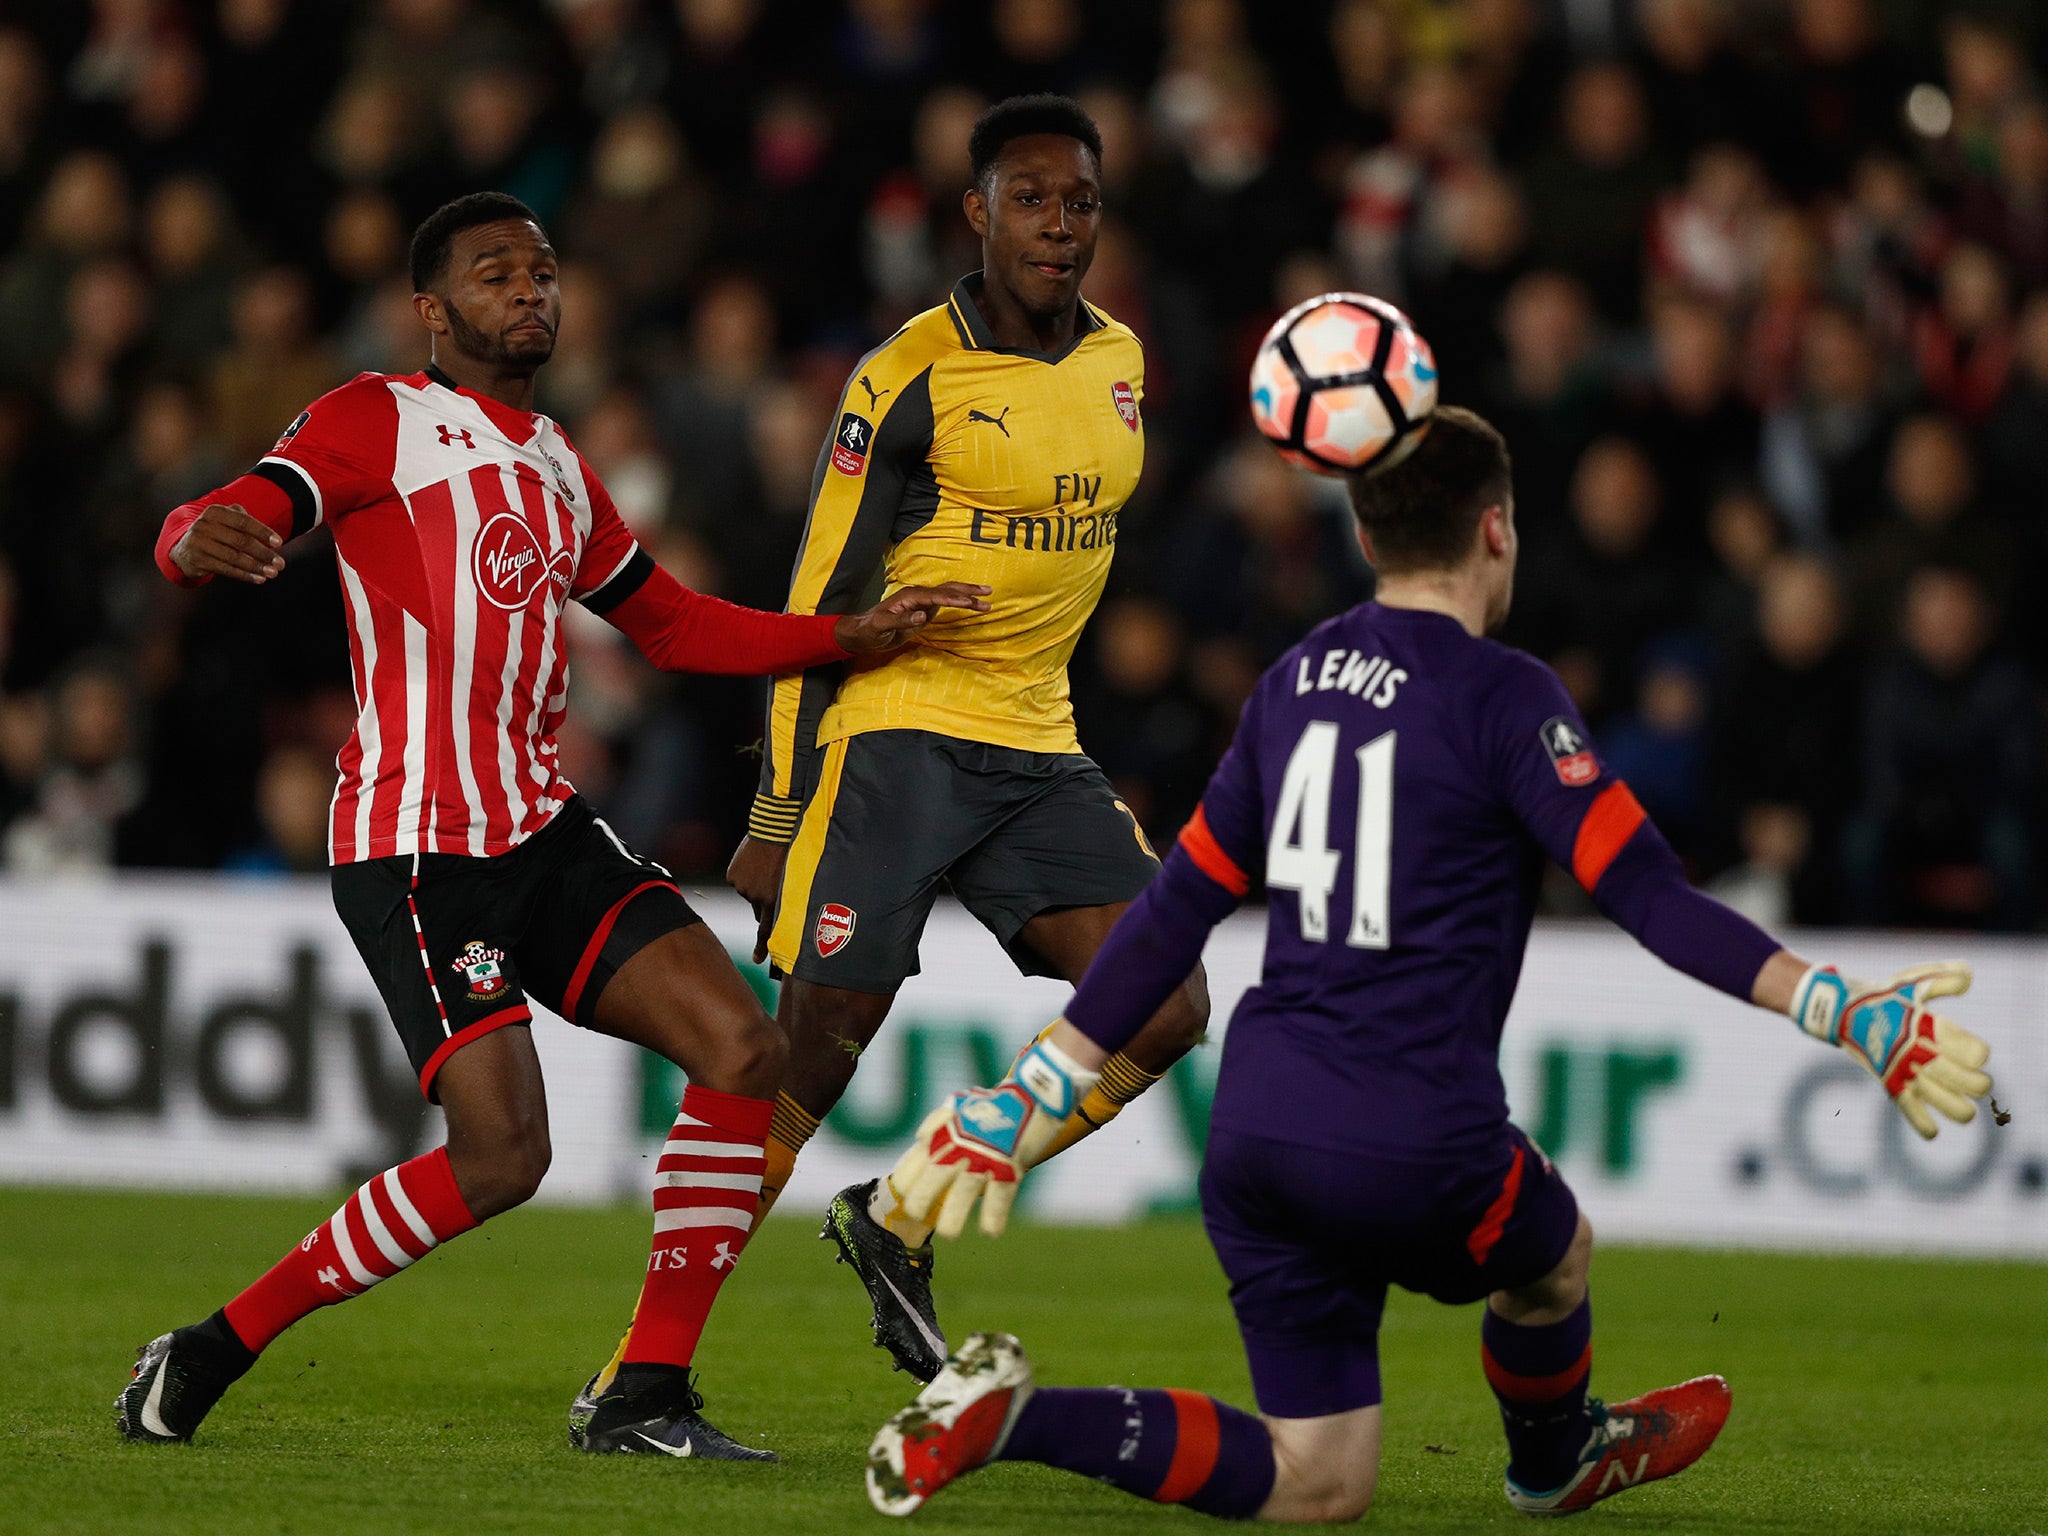 Welbeck finished with aplomb to score his first since returning from injury